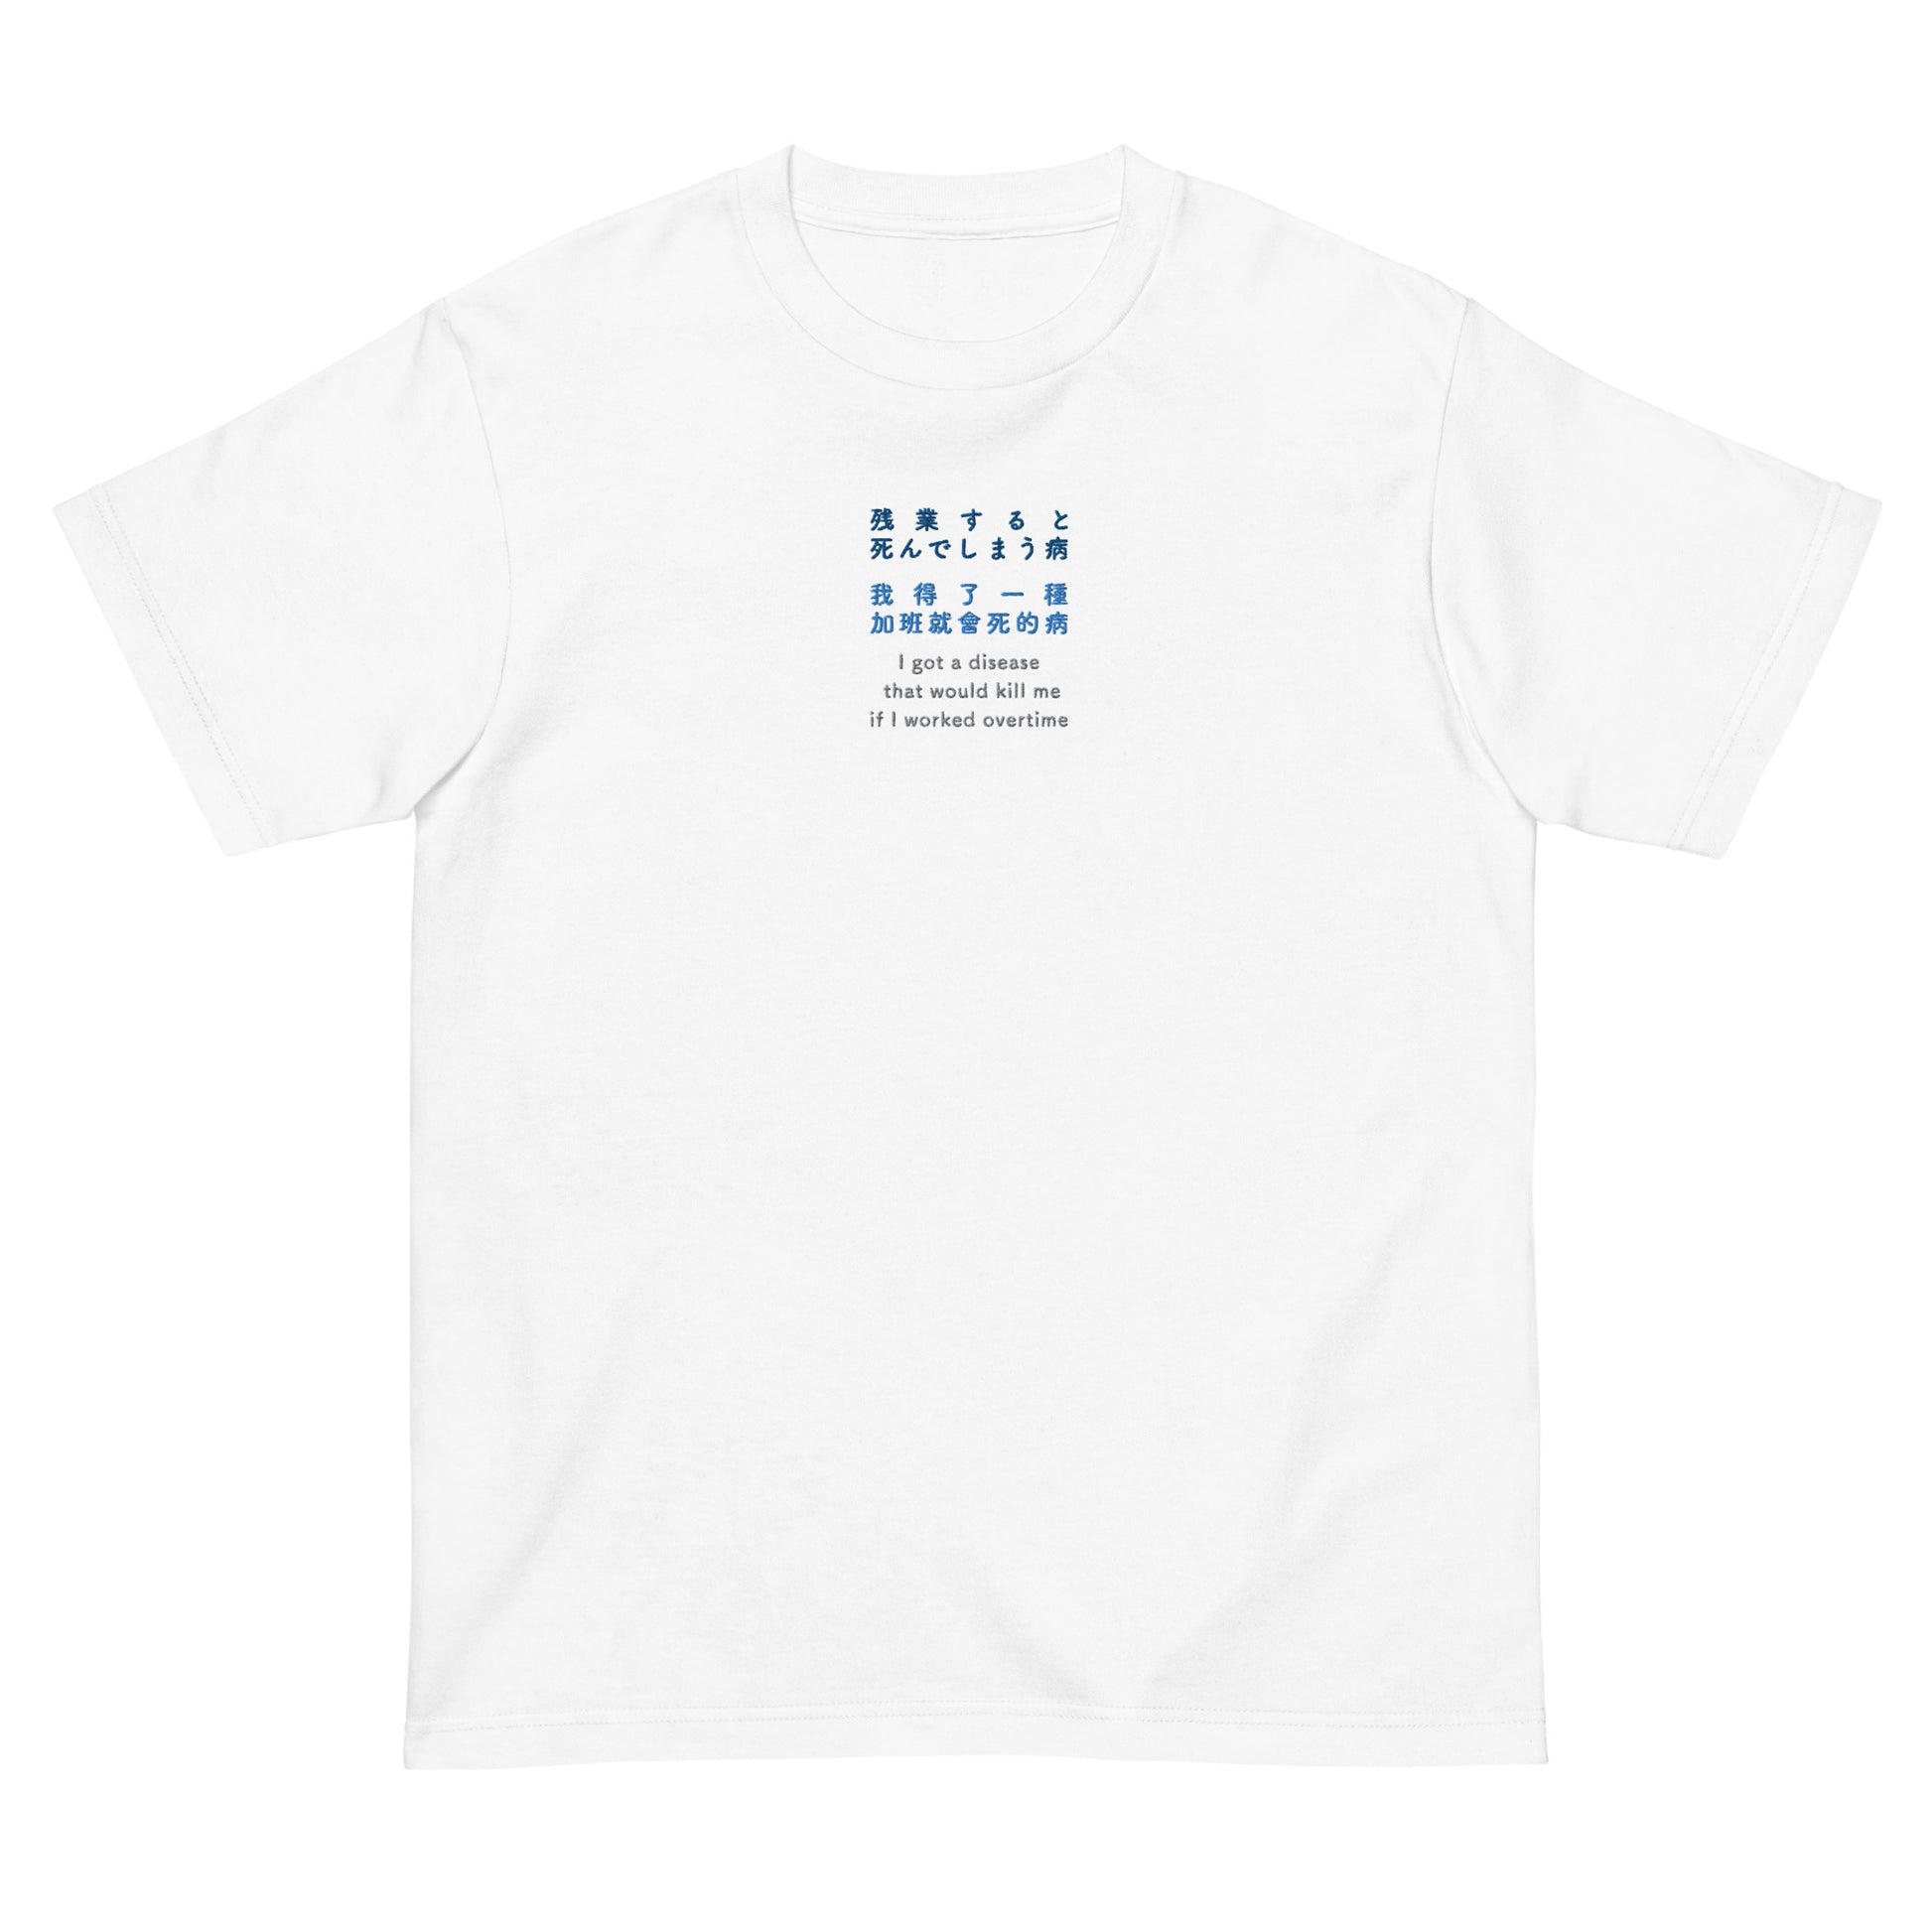 White High Quality Tee - Front Design with an Navy, Light Blue, Gray Embroidery "i got a disease that would kill me if i worked overtime" in Japanese,Chinese and English